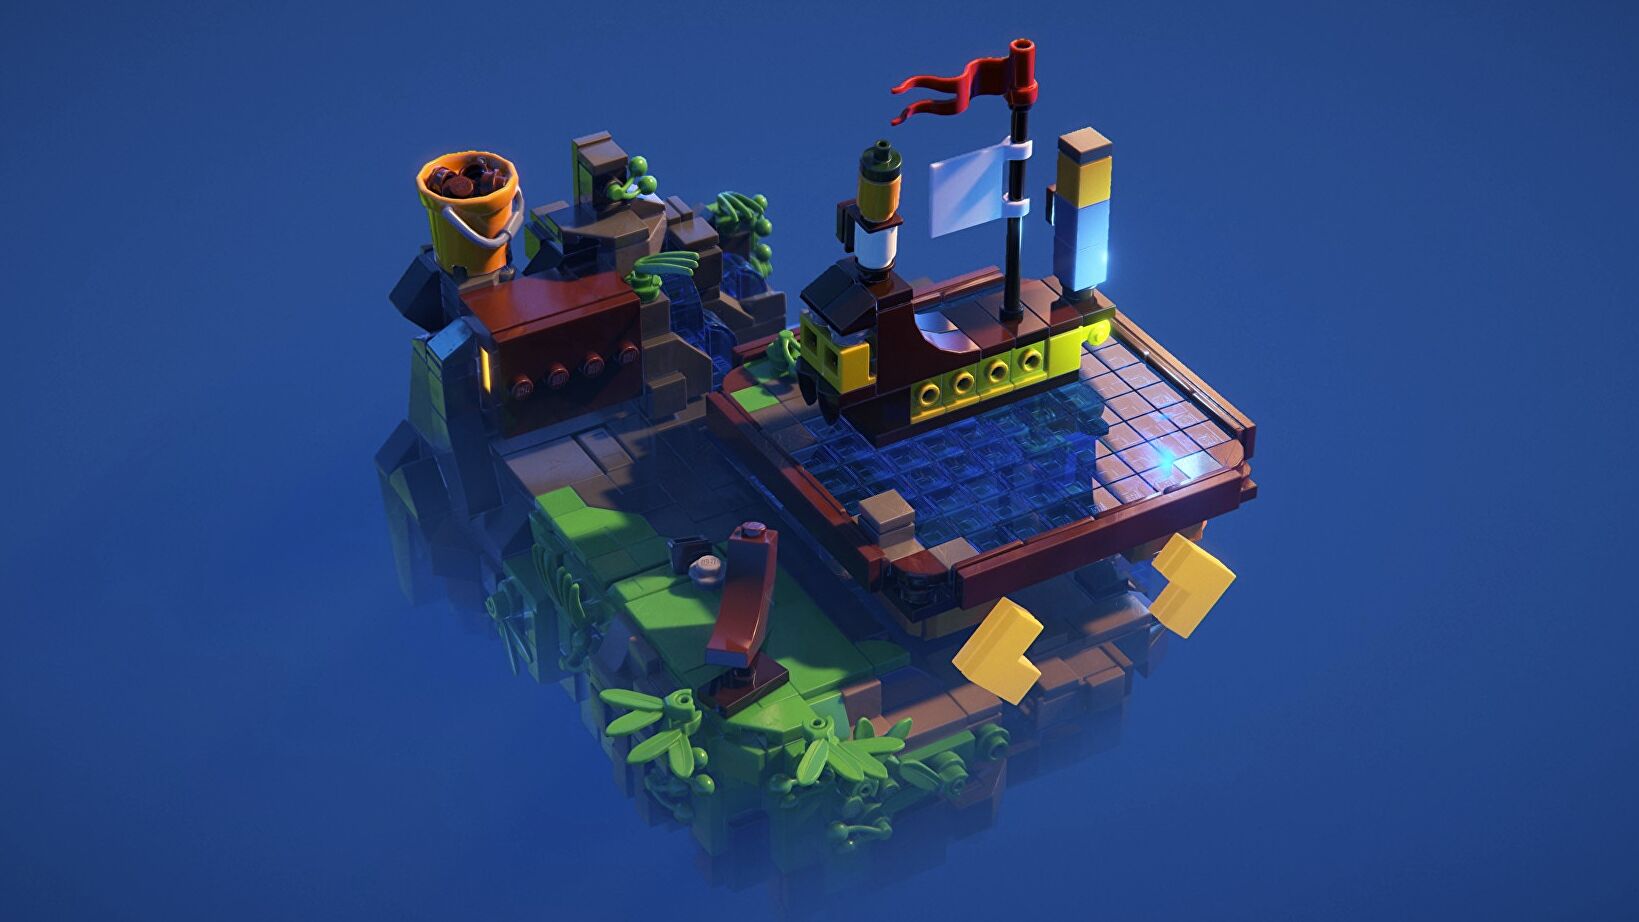 Lego Builder's Journey is the next free game from the Epic Games Store